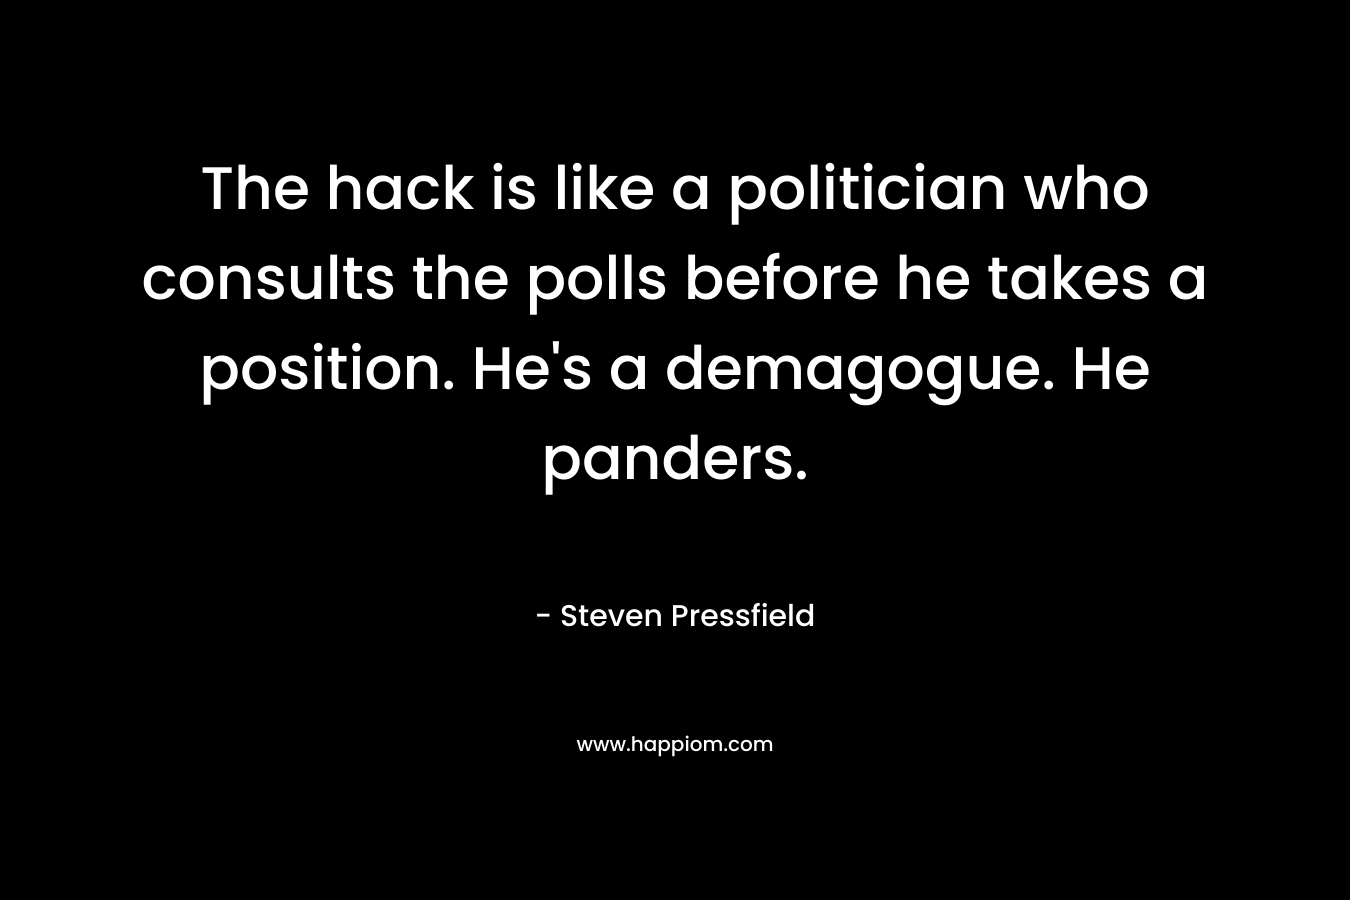 The hack is like a politician who consults the polls before he takes a position. He’s a demagogue. He panders. – Steven Pressfield